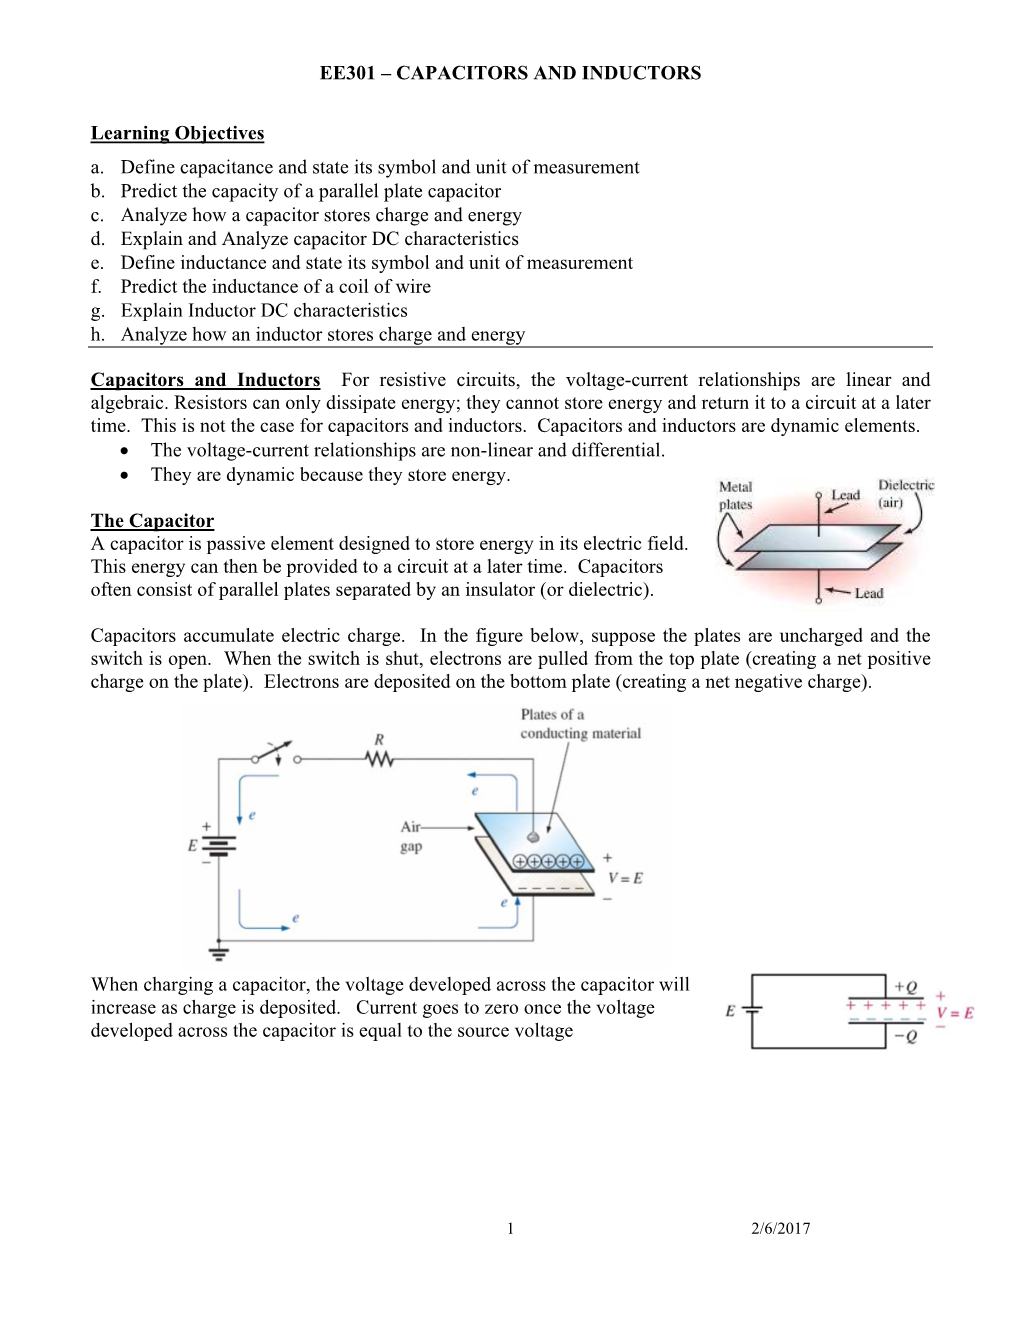 EE301 – CAPACITORS and INDUCTORS Learning Objectives A. Define Capacitance and State Its Symbol and Unit of Measurement B